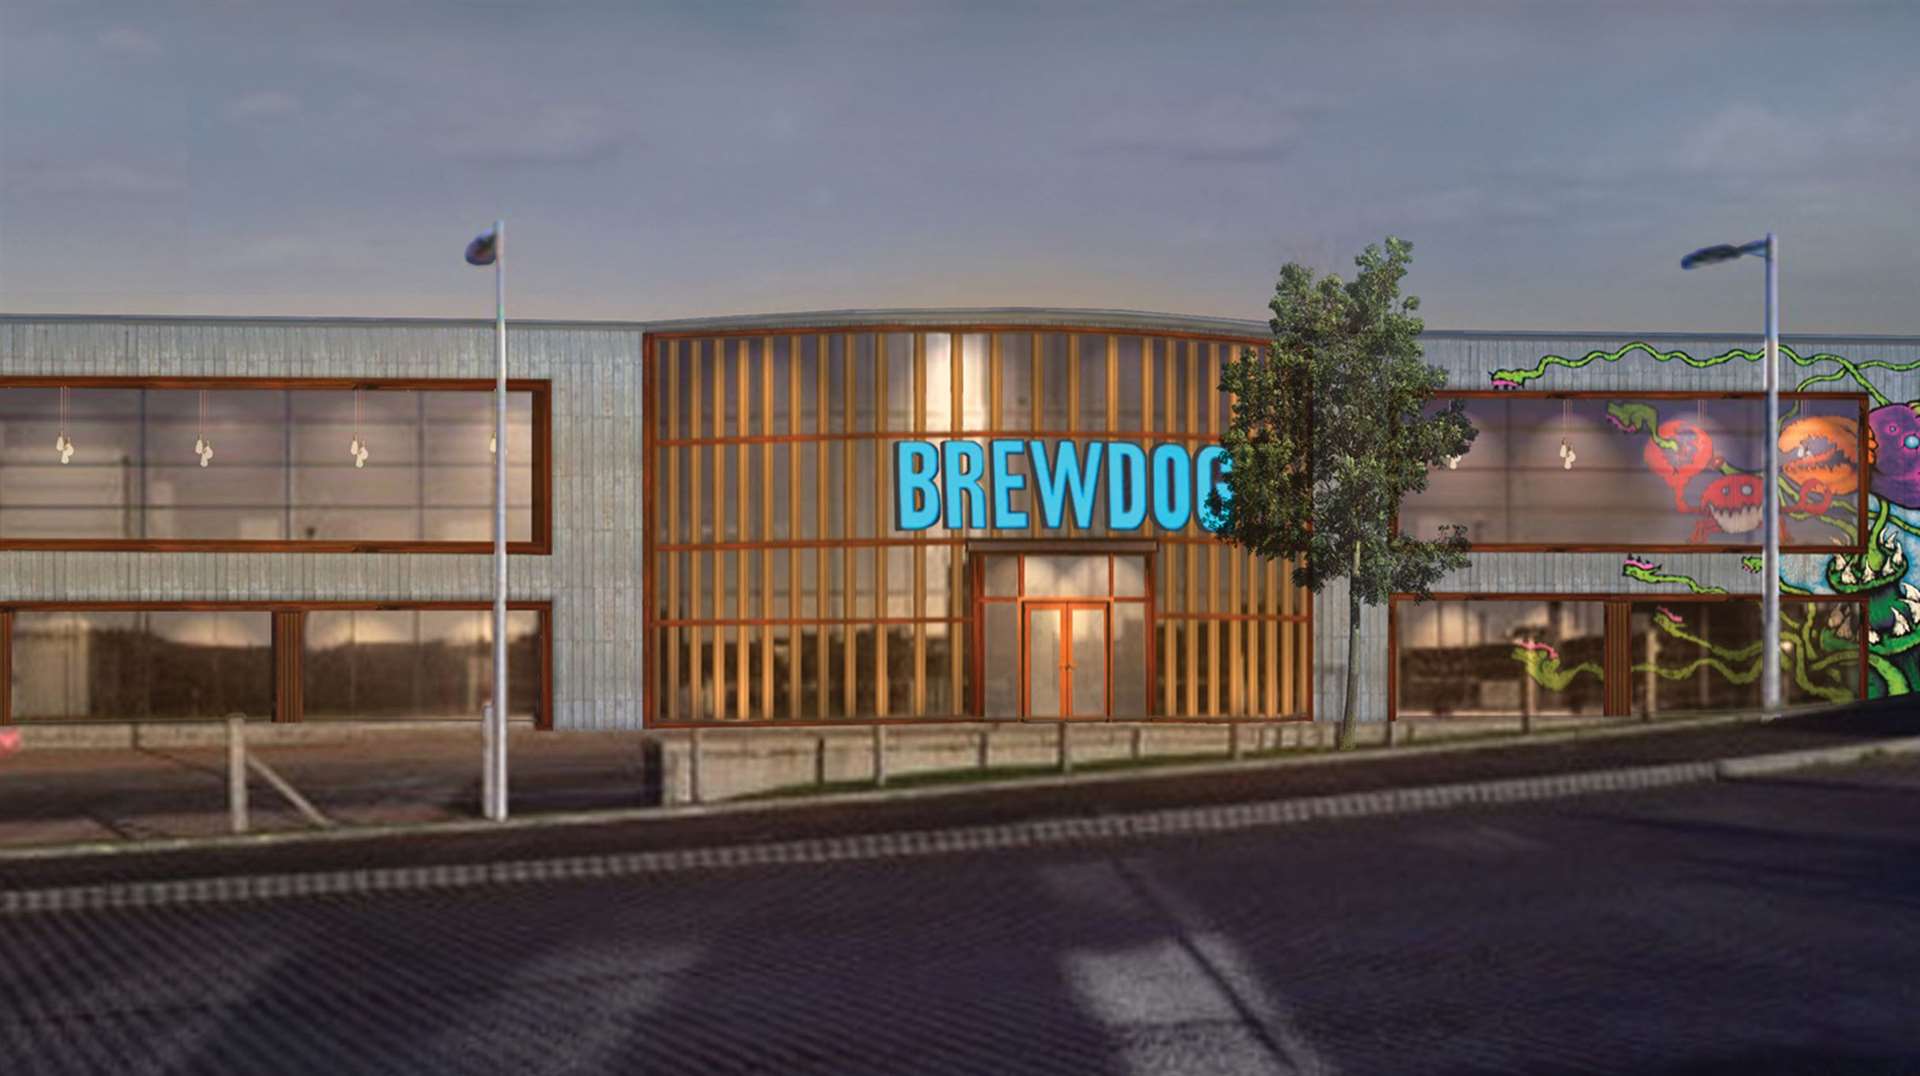 Brewdog's plans to convert the former Powerjacks premisies have been approved.